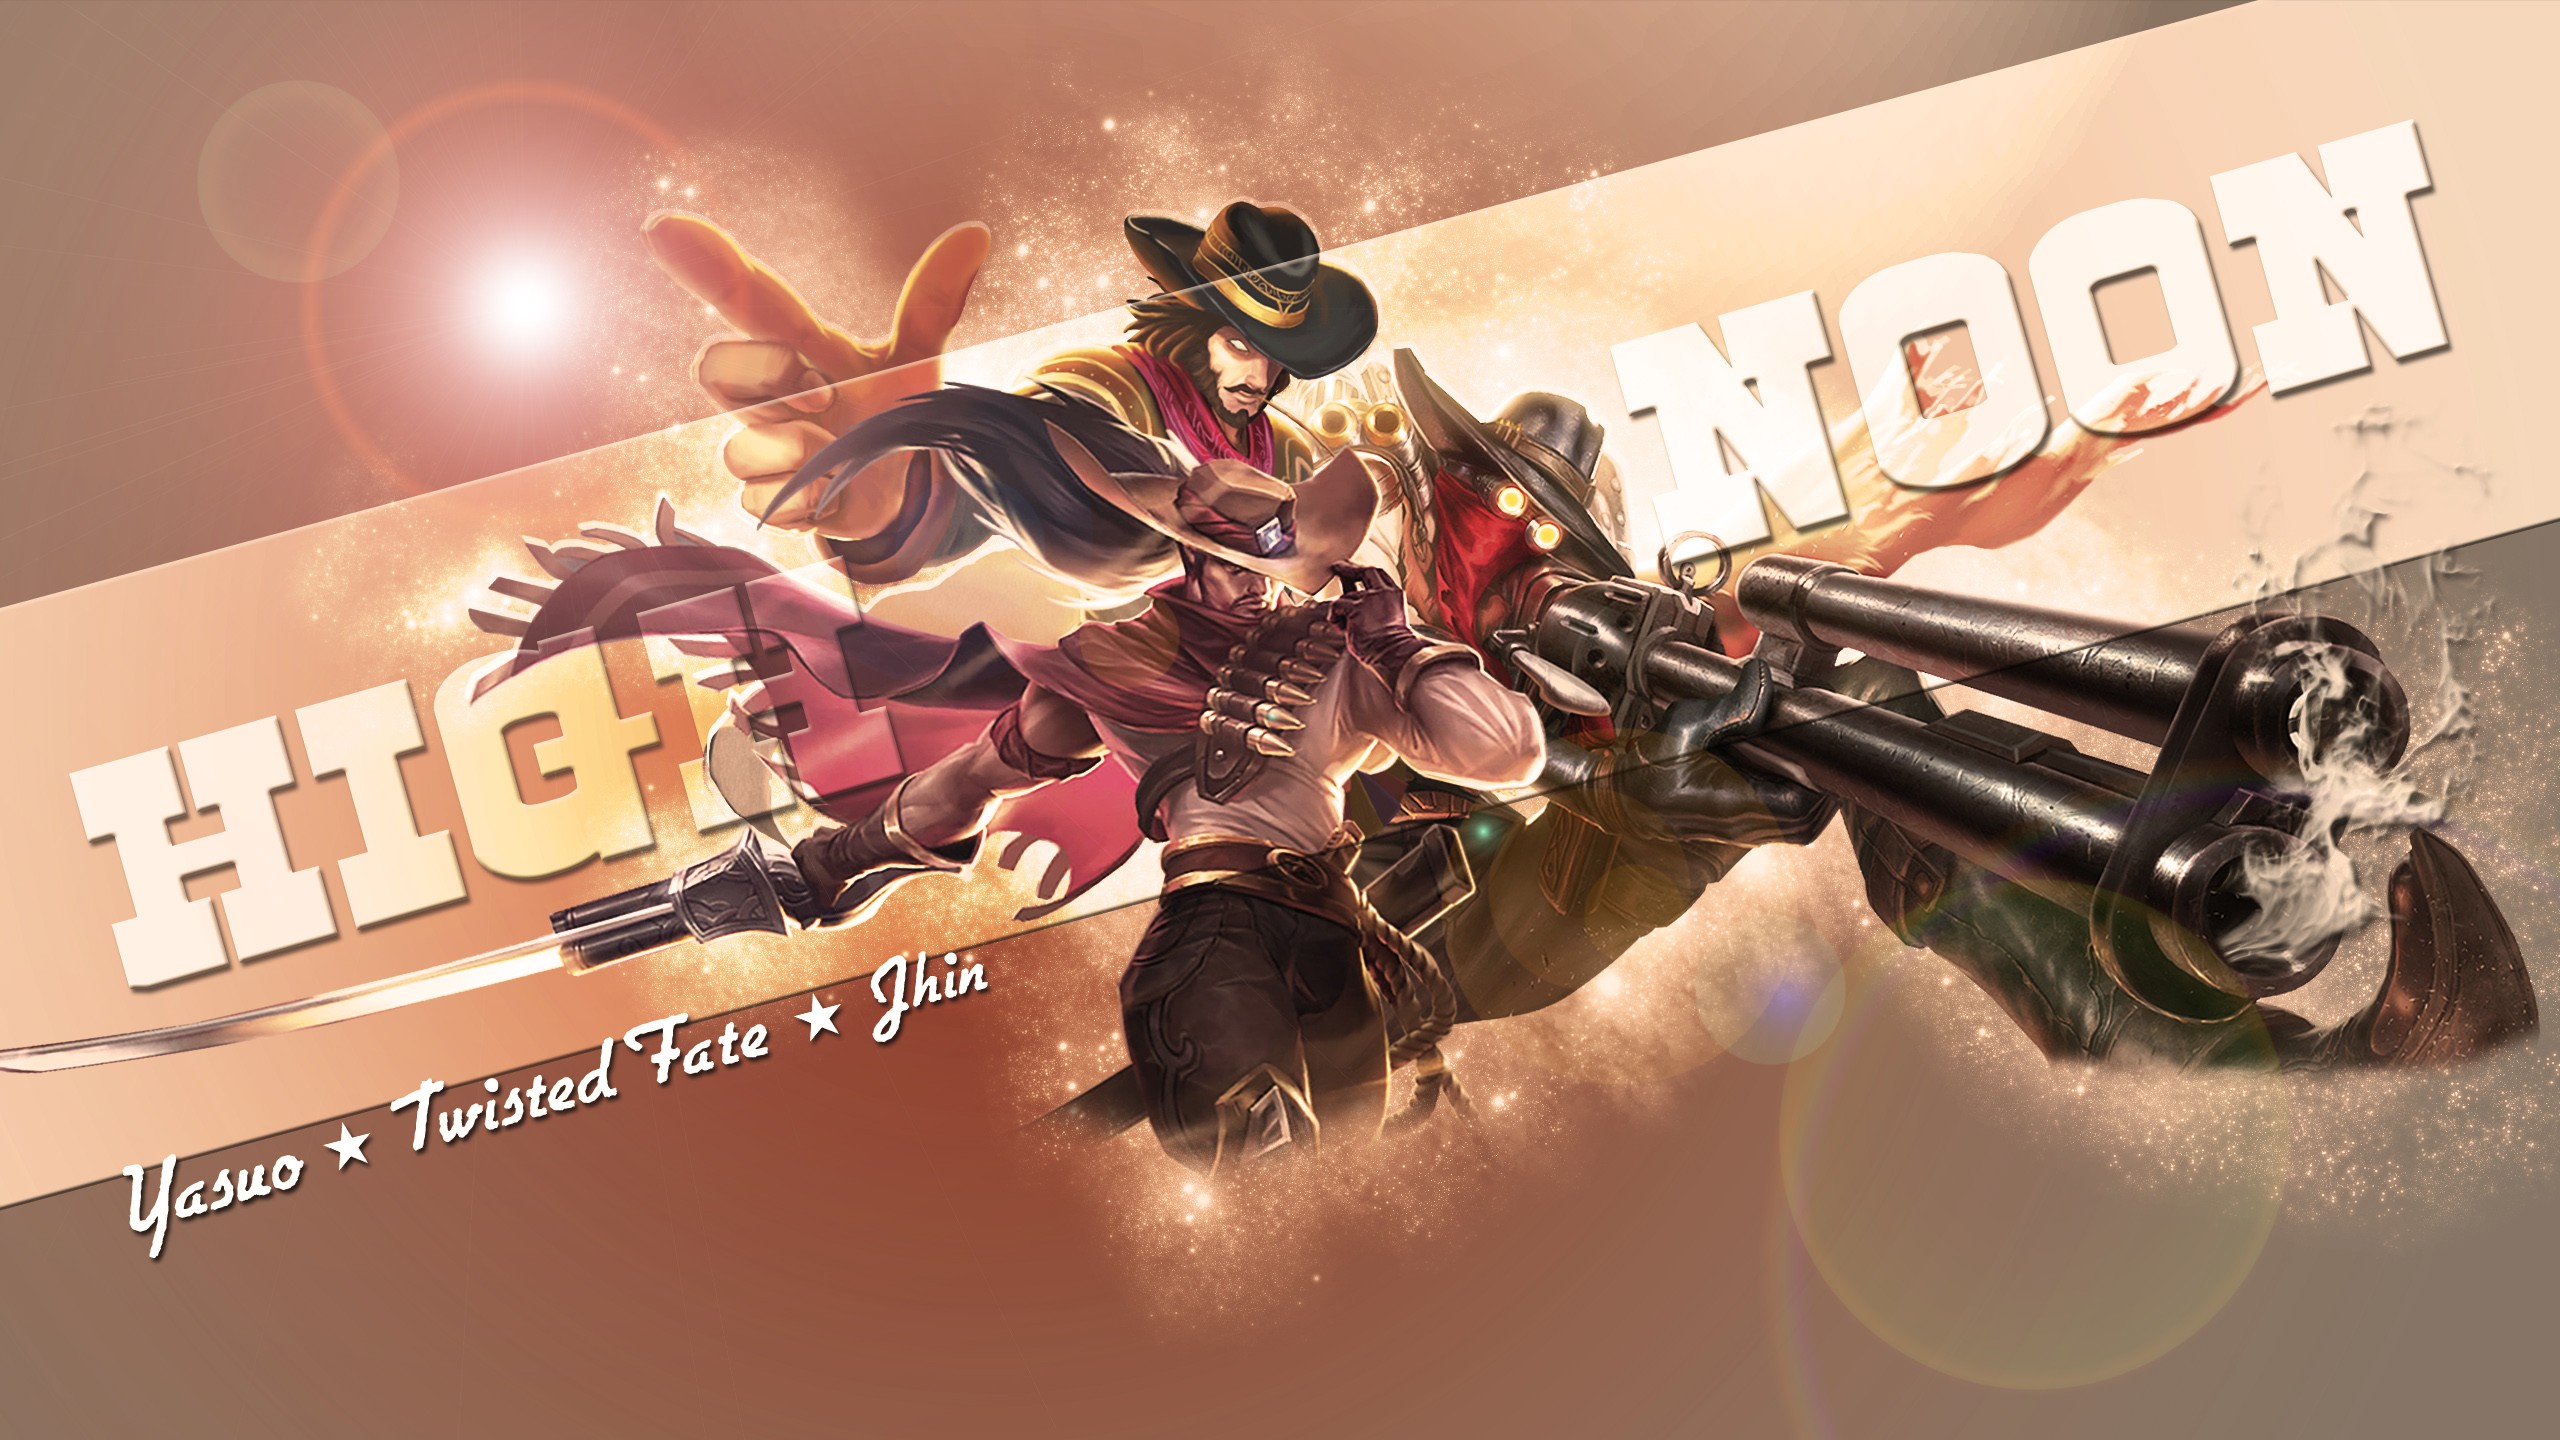 High Noon Jhin, Yasuo & Twisted Fate By Brumskyy Hd - High Noon Yasuo Jhin - HD Wallpaper 